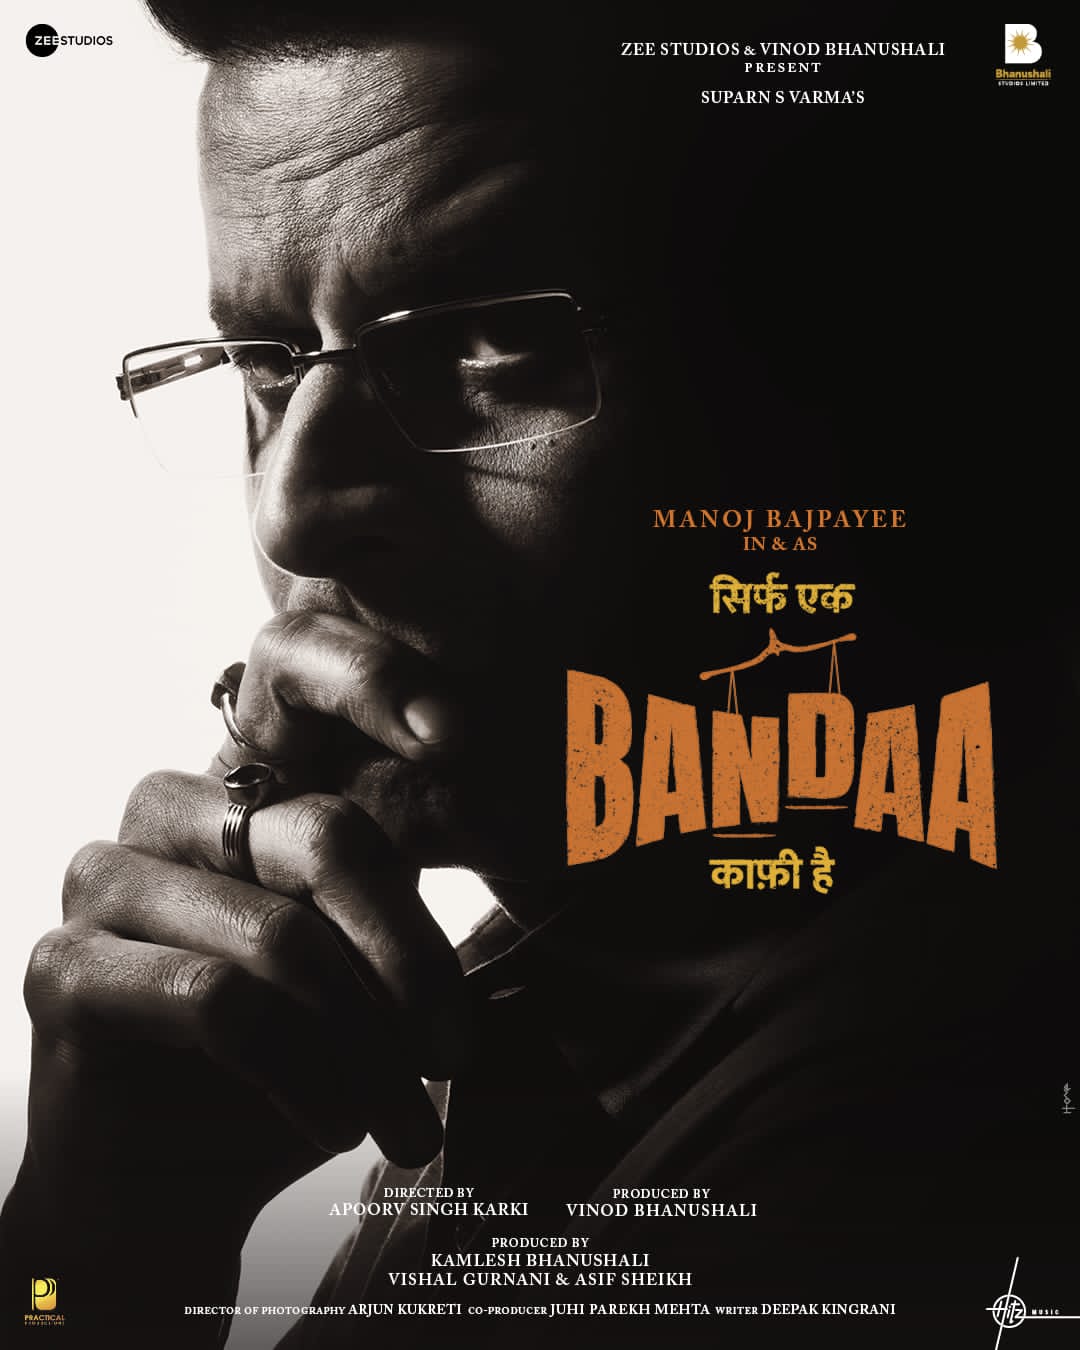 BANDAA poster out: Manoj Bajpayee sports an intense look in the hard-hitting courtroom drama!
